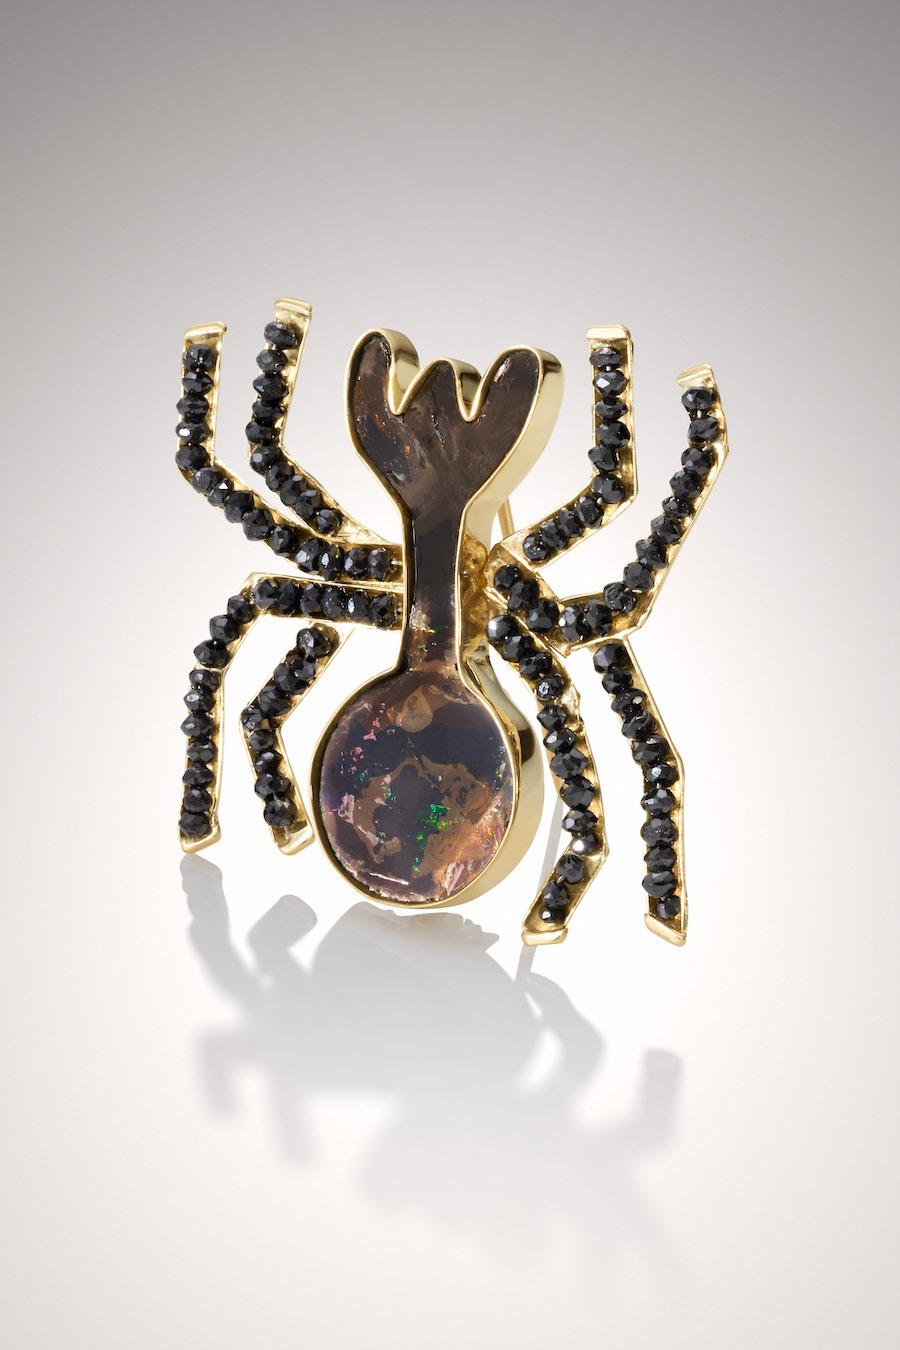 18KY, Black Diamonds, Black Mica, Nazca Line Spider Pin was inspired by my intrigue of the organic Nazca Line shapes in the desserts of Peru. This handmade, one-of-a-kind brooch will certainly become an animated part of your jewelry collection.
He's